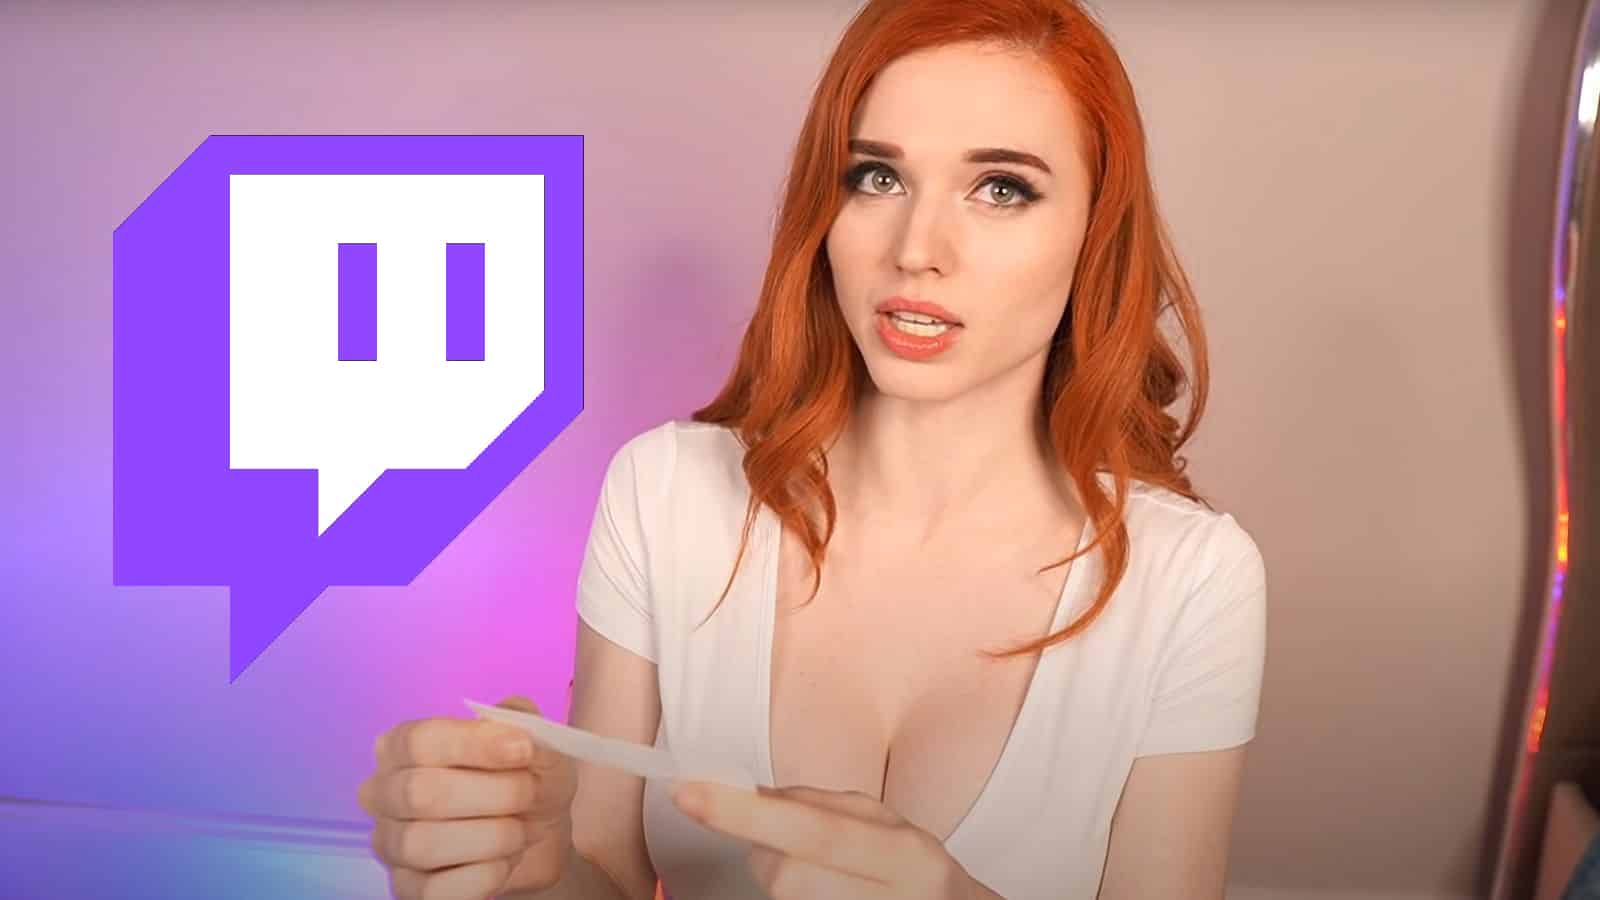 Top female Twitch streamer Amouranth joined the NFT world with an NSFW pixe...